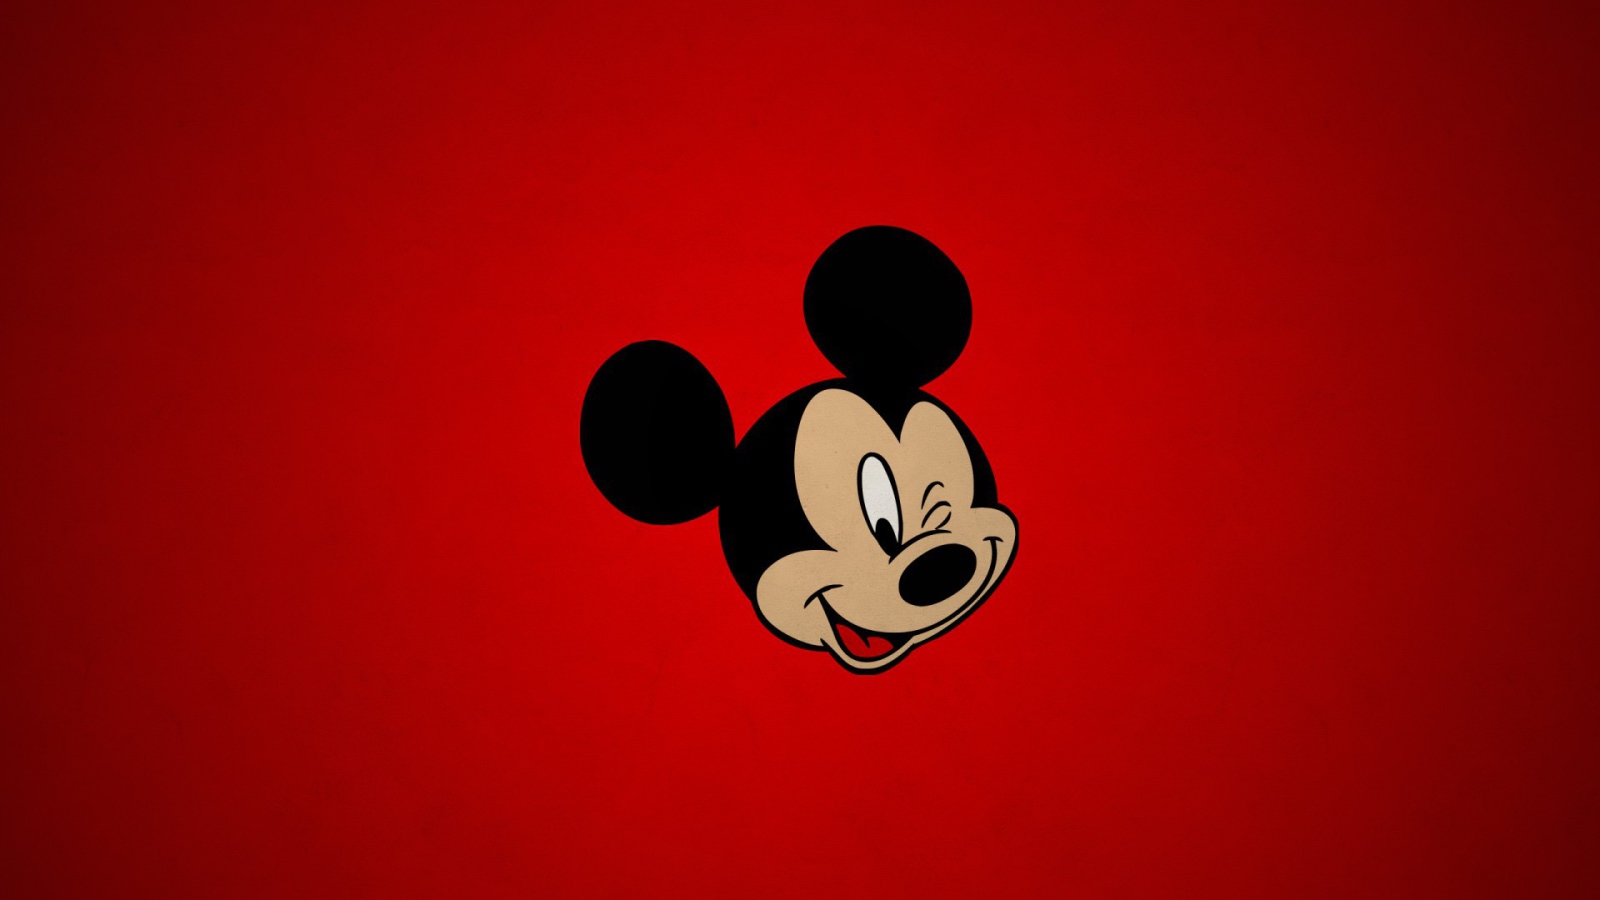 Mickey Mouse winks